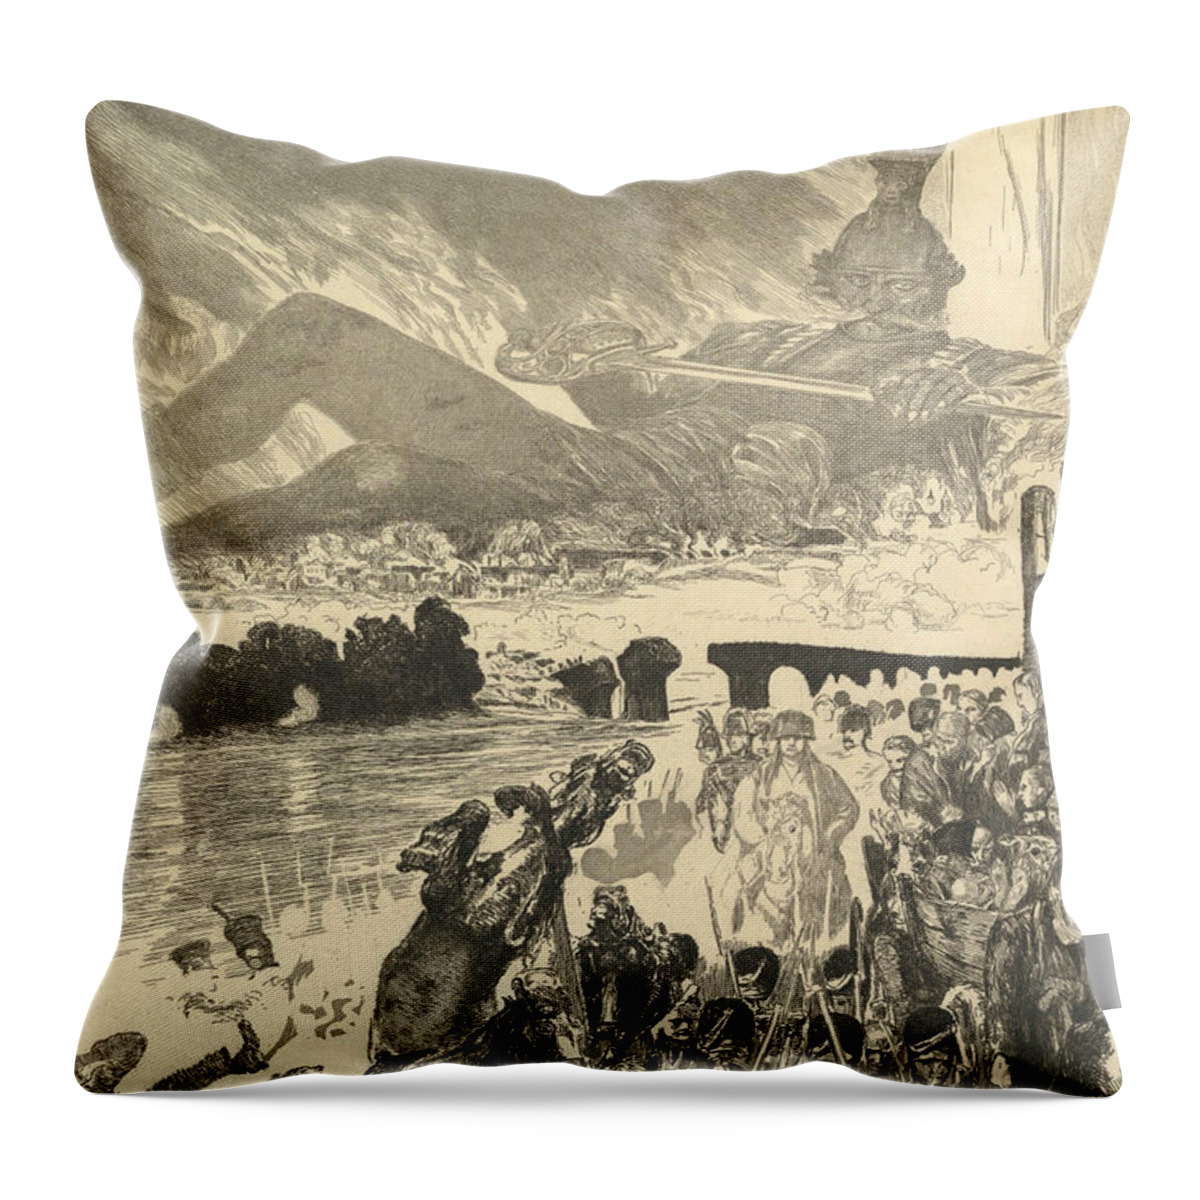 19th Century Art Throw Pillow featuring the relief Krieg, from the series Vom Tode Zweiter Teil by Max Klinger